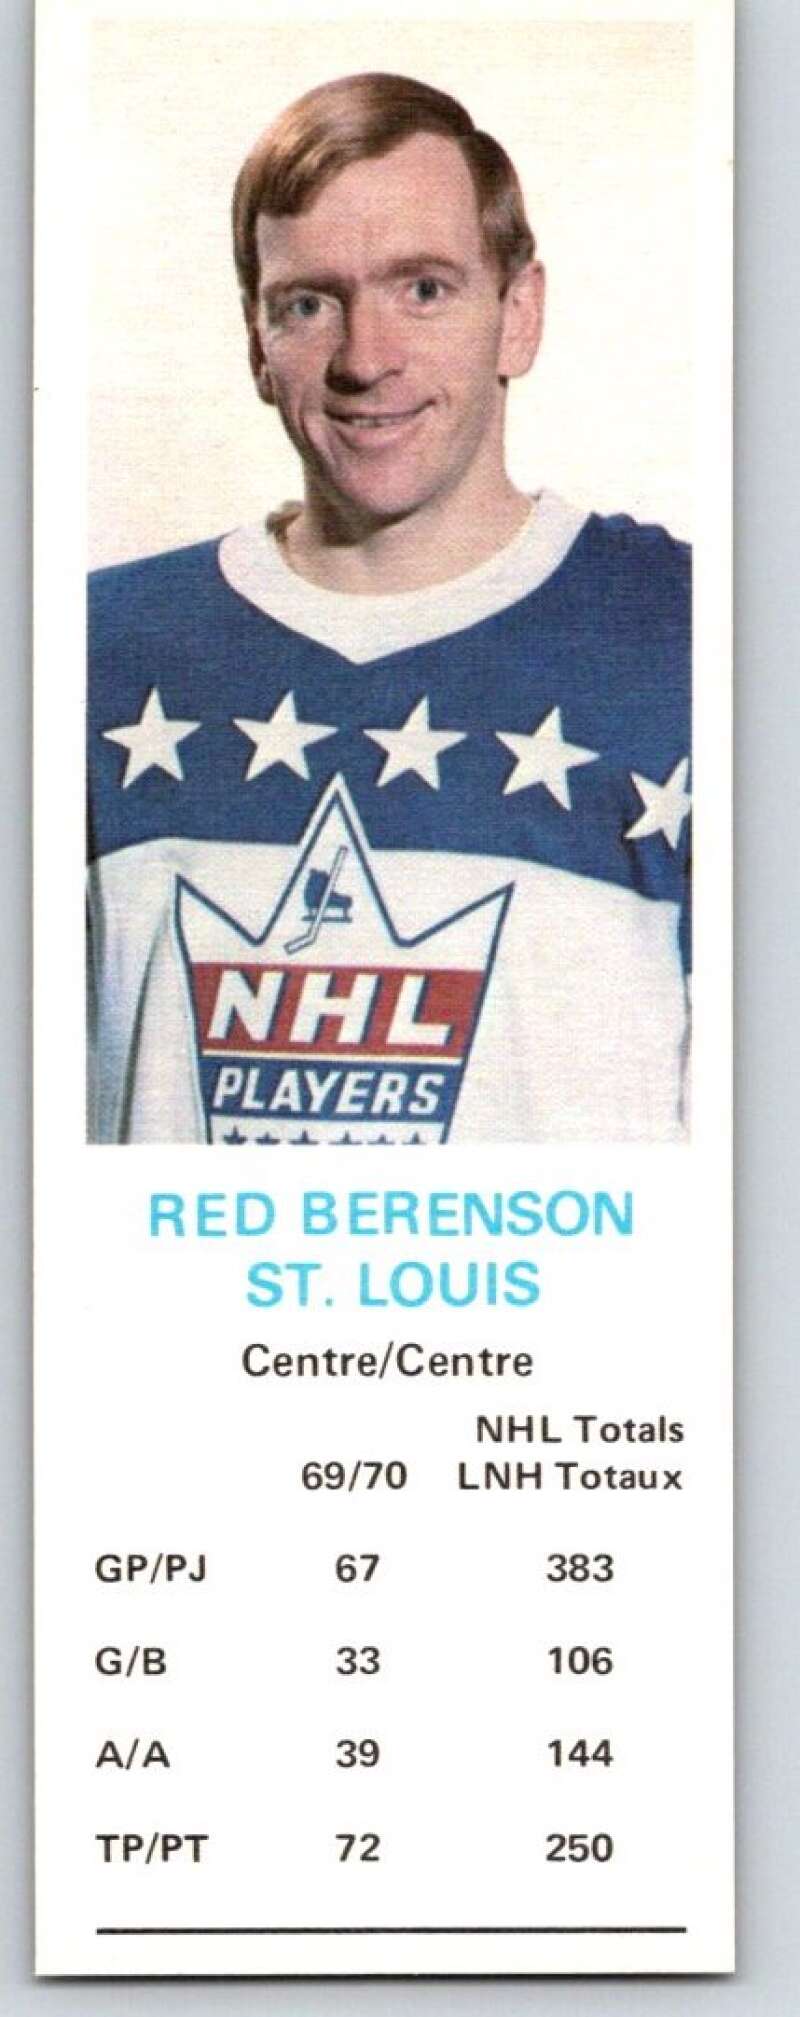 1970-71 Dad's Cookies #5 Red Berenson  St. Louis Blues  X195